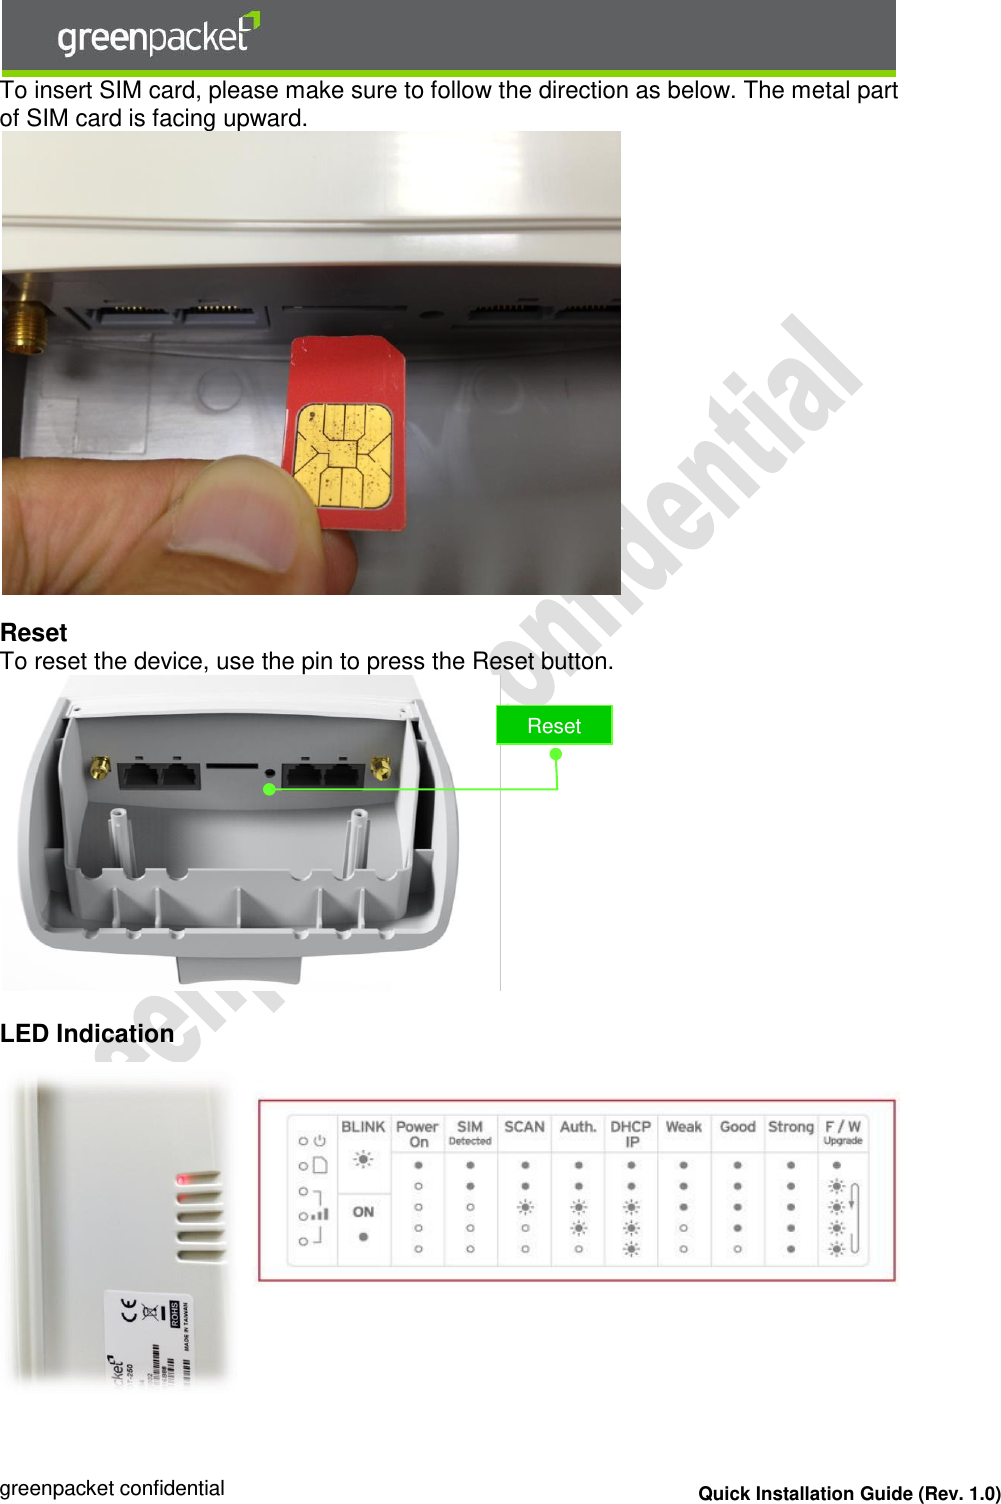  greenpacket confidential Quick Installation Guide (Rev. 1.0) To insert SIM card, please make sure to follow the direction as below. The metal part of SIM card is facing upward.    Reset To reset the device, use the pin to press the Reset button.    LED Indication     FCC Regulations:  Reset  